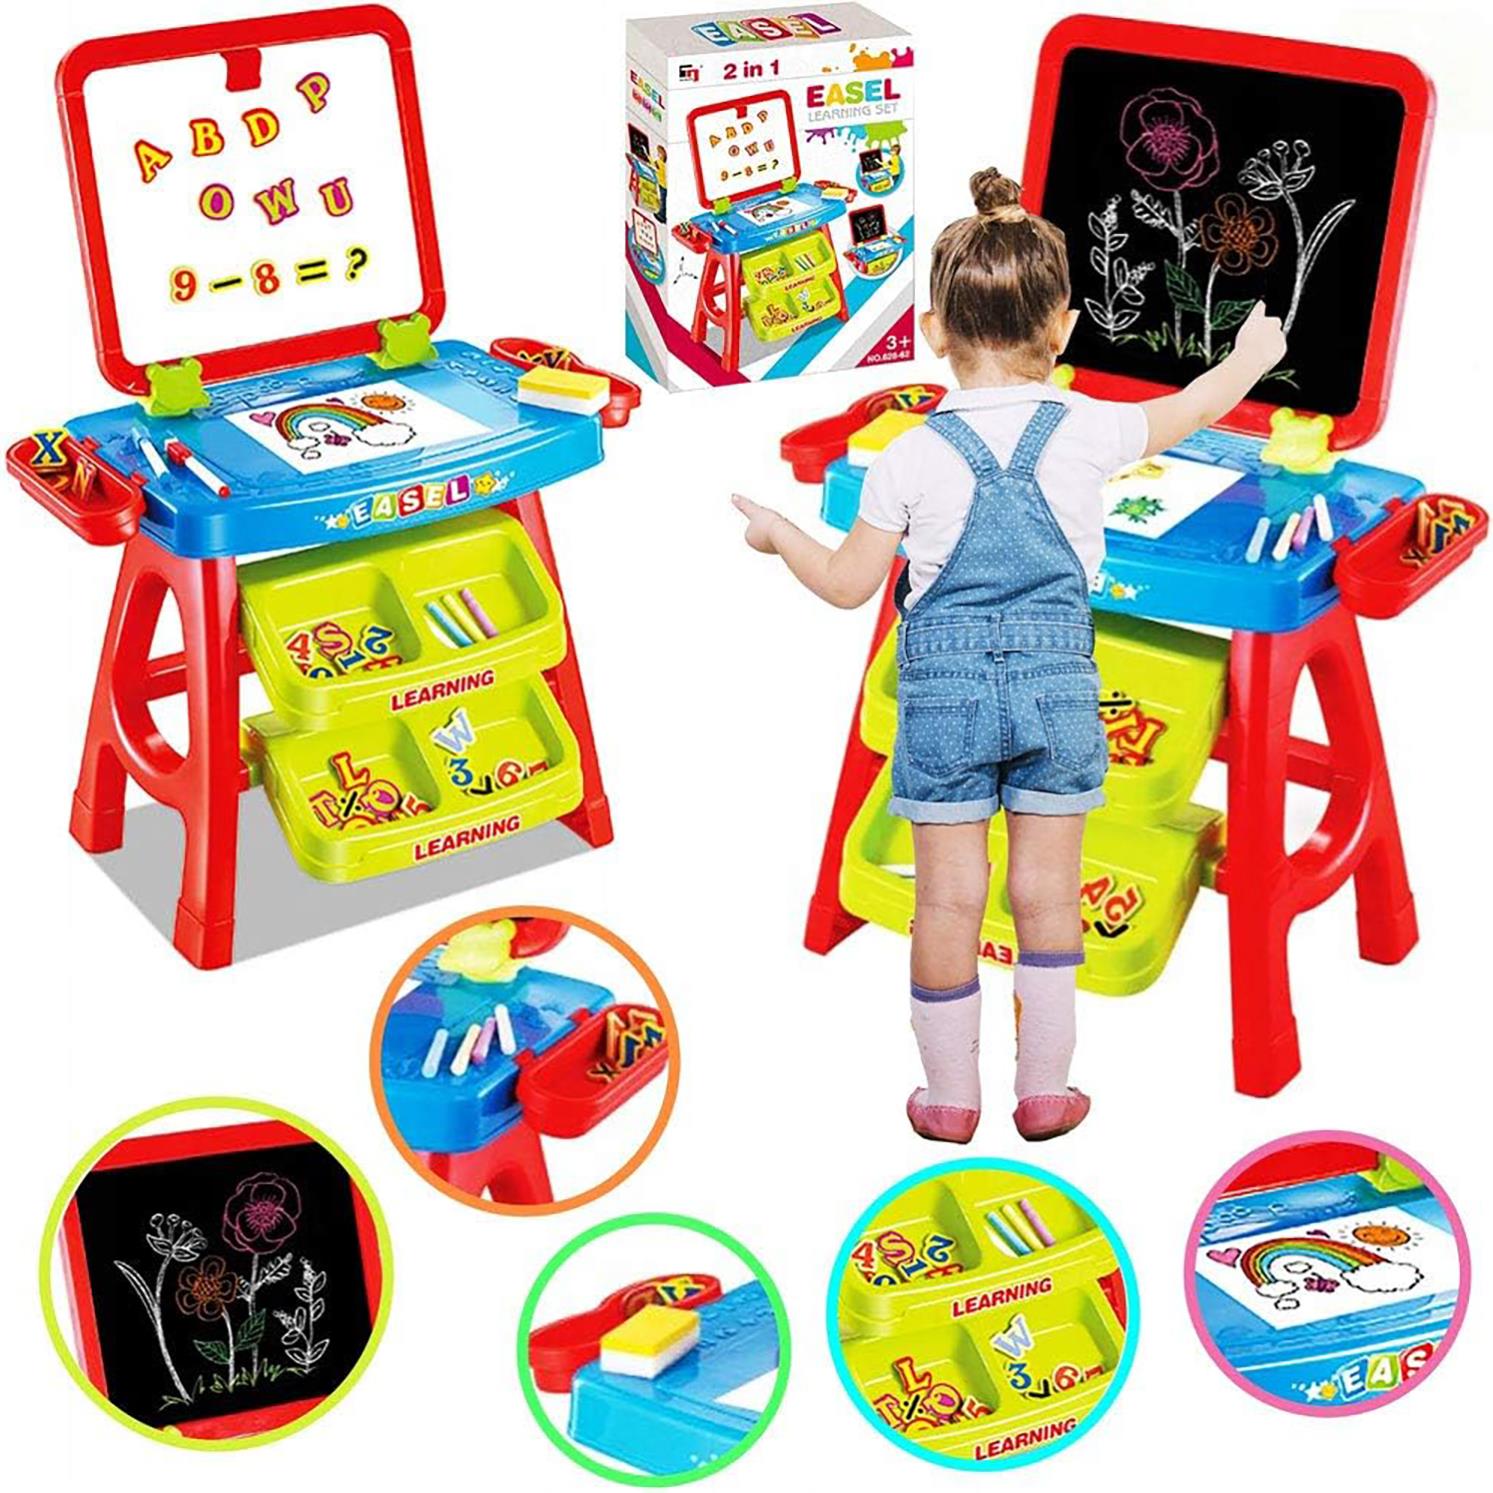 Learning Desk & Magnetic Easel Chalkboard by The Magic Toy Shop - UKBuyZone